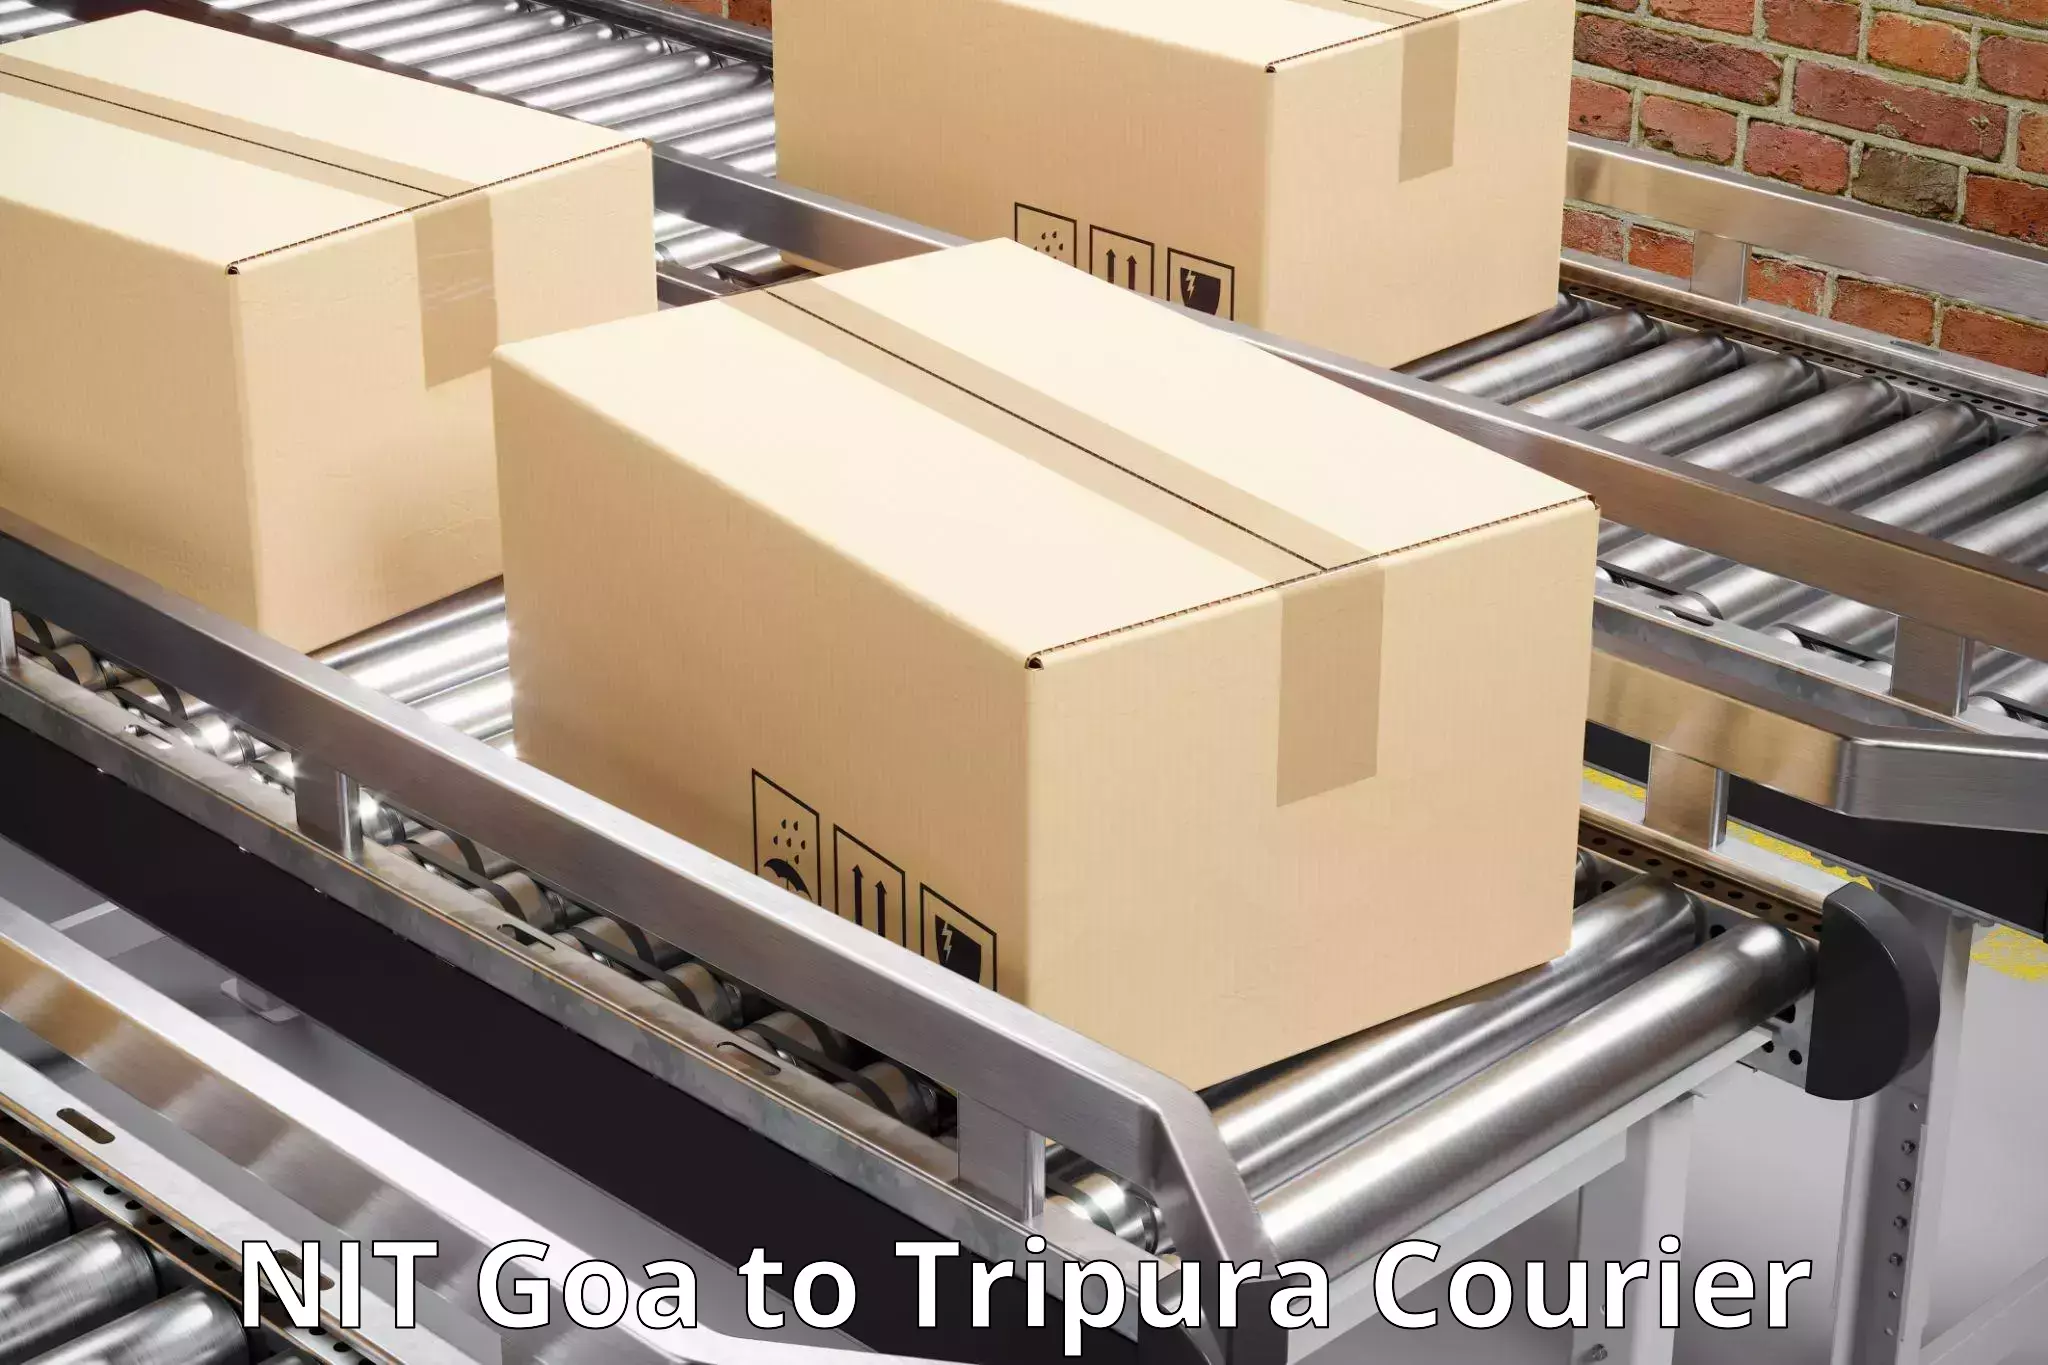 User-friendly courier app NIT Goa to Aambasa